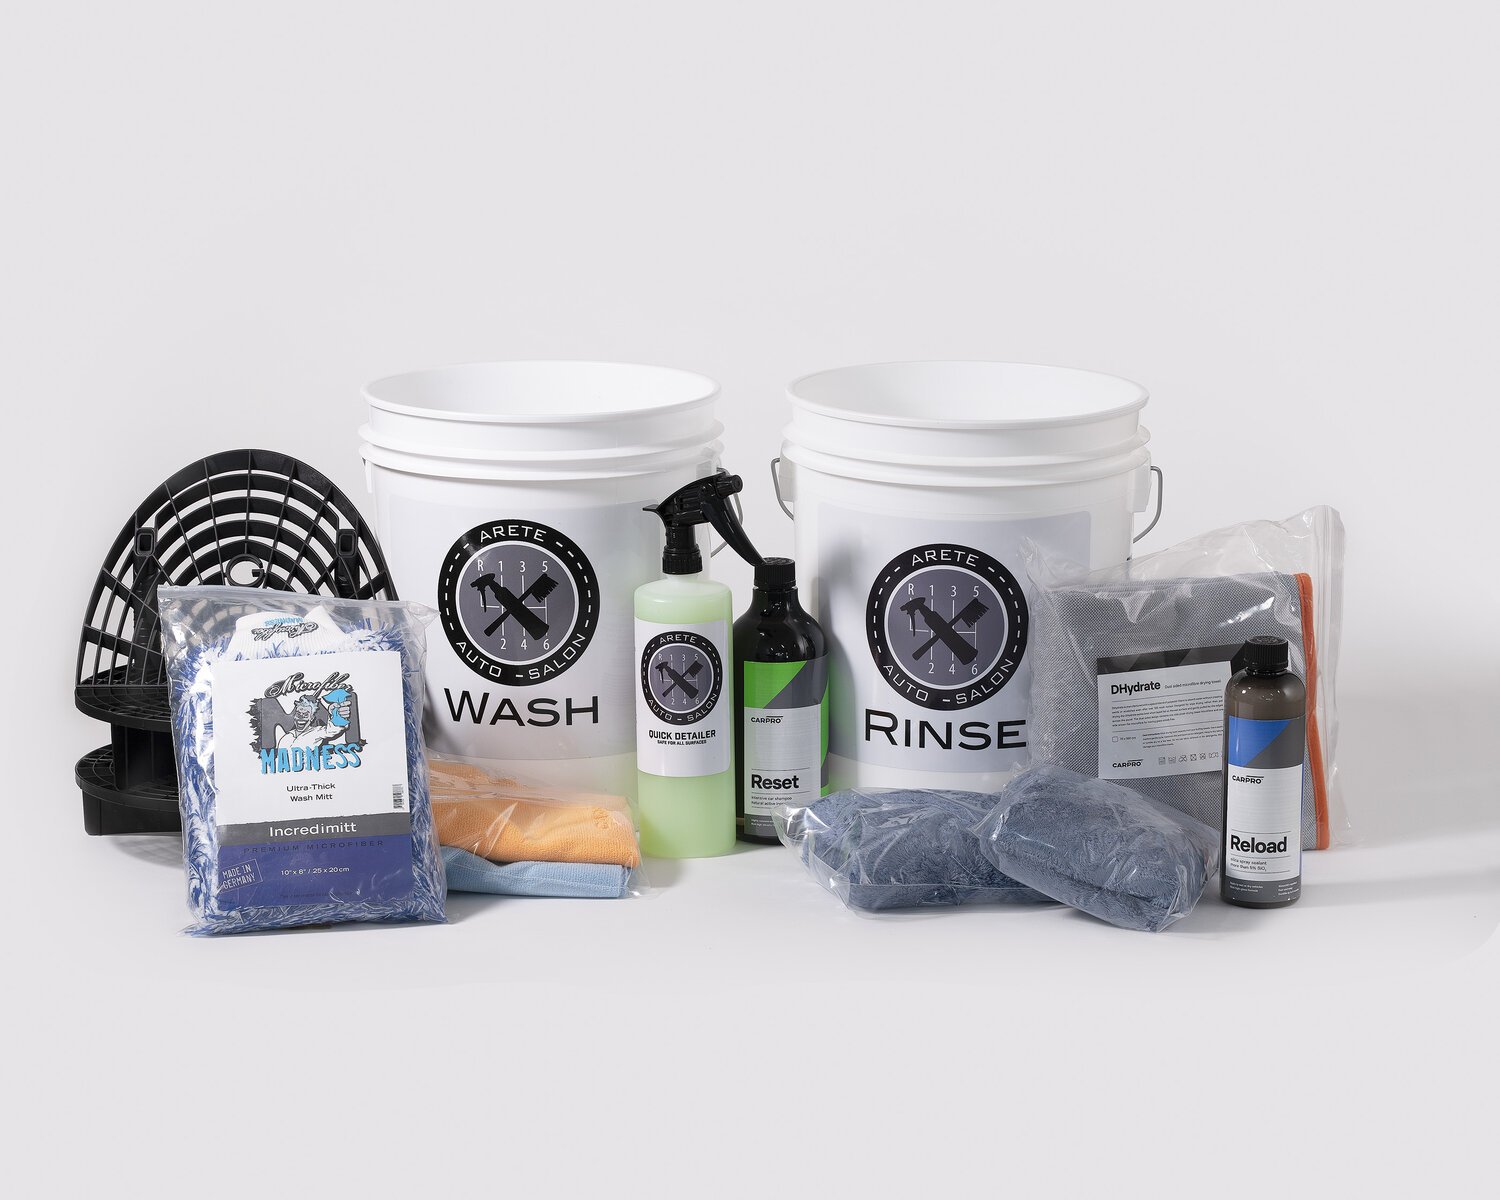 Car Cleaning Kits for sale in New York, New York